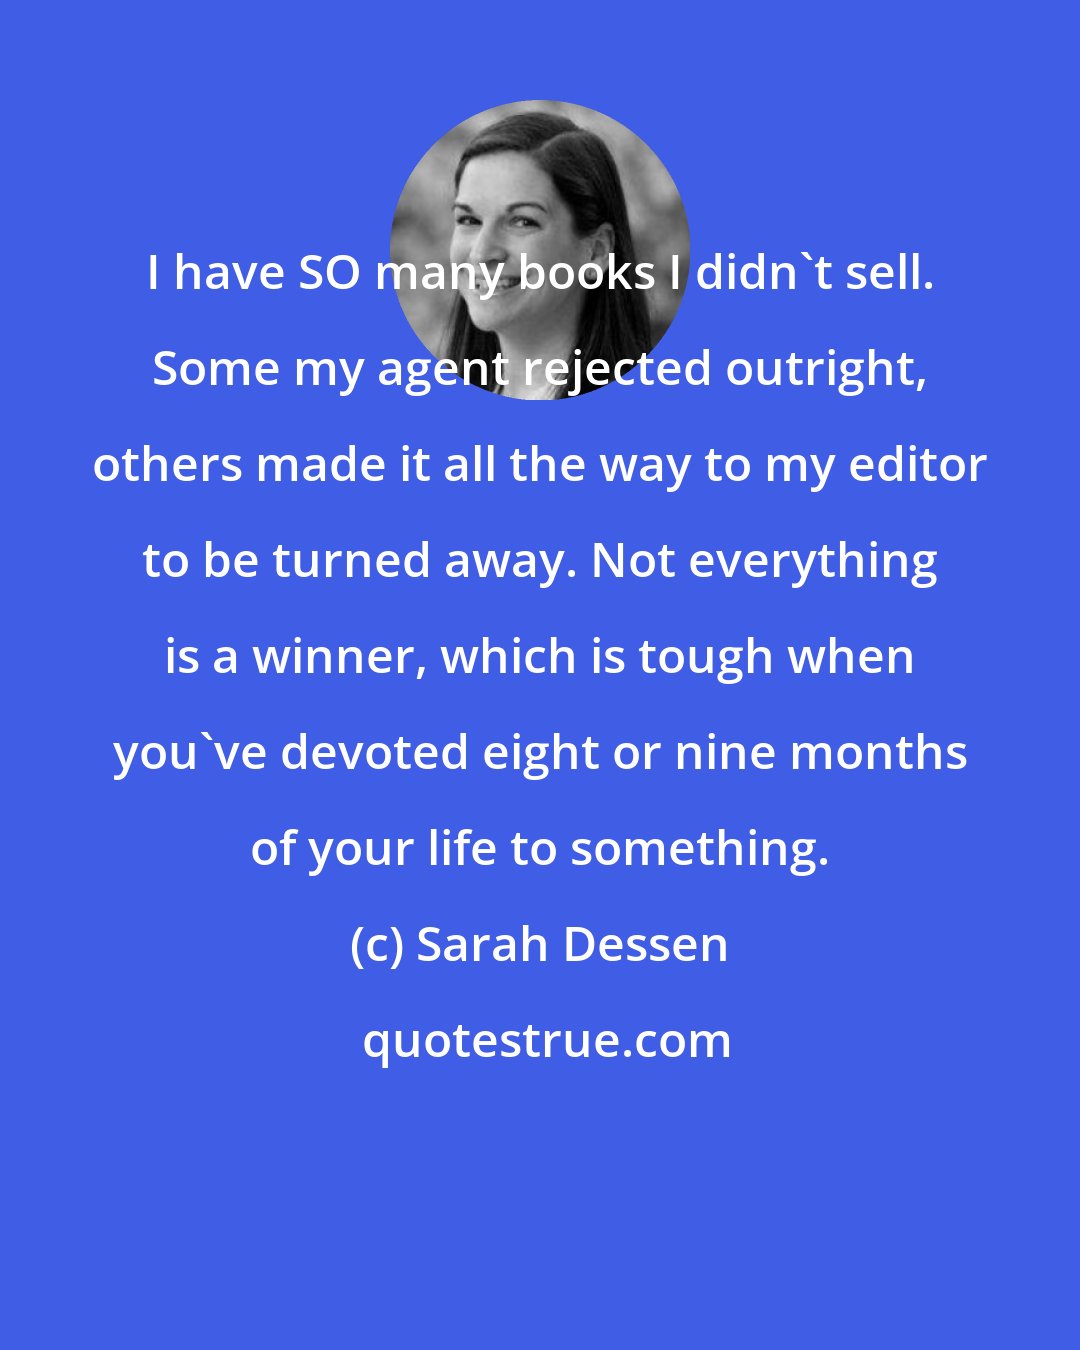 Sarah Dessen: I have SO many books I didn't sell. Some my agent rejected outright, others made it all the way to my editor to be turned away. Not everything is a winner, which is tough when you've devoted eight or nine months of your life to something.